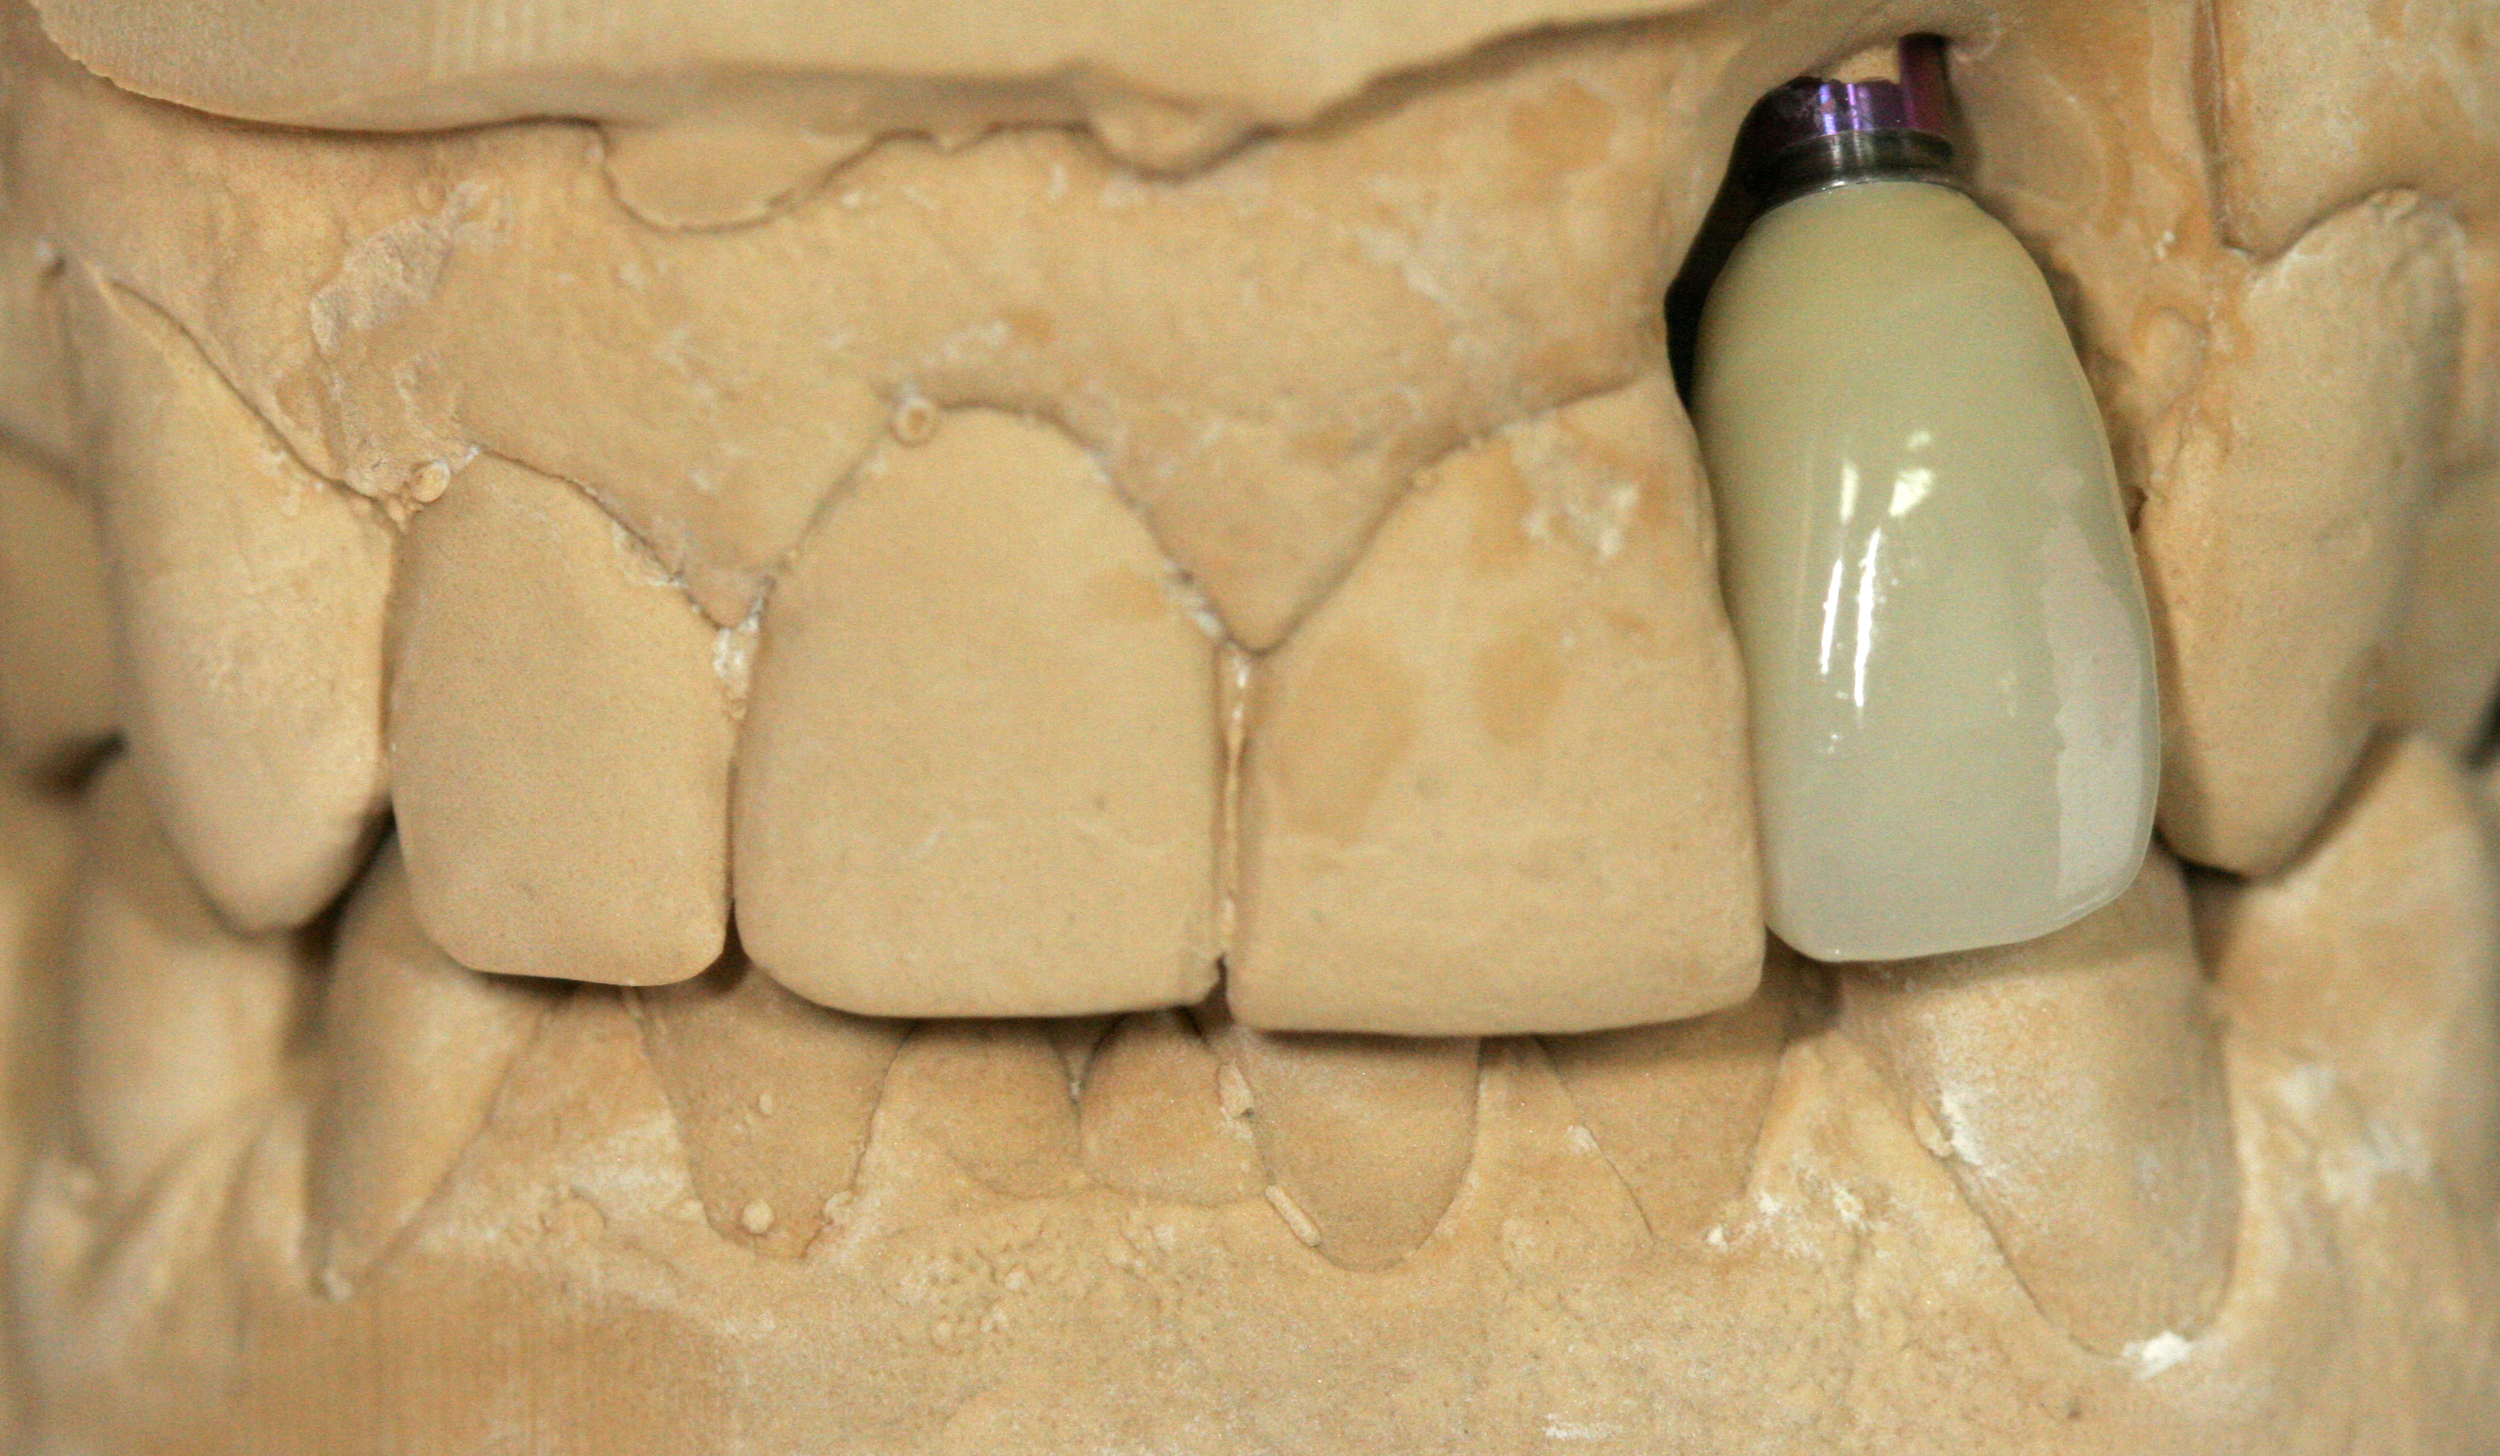 Finished SMT Layered Zirconia implant crown on model